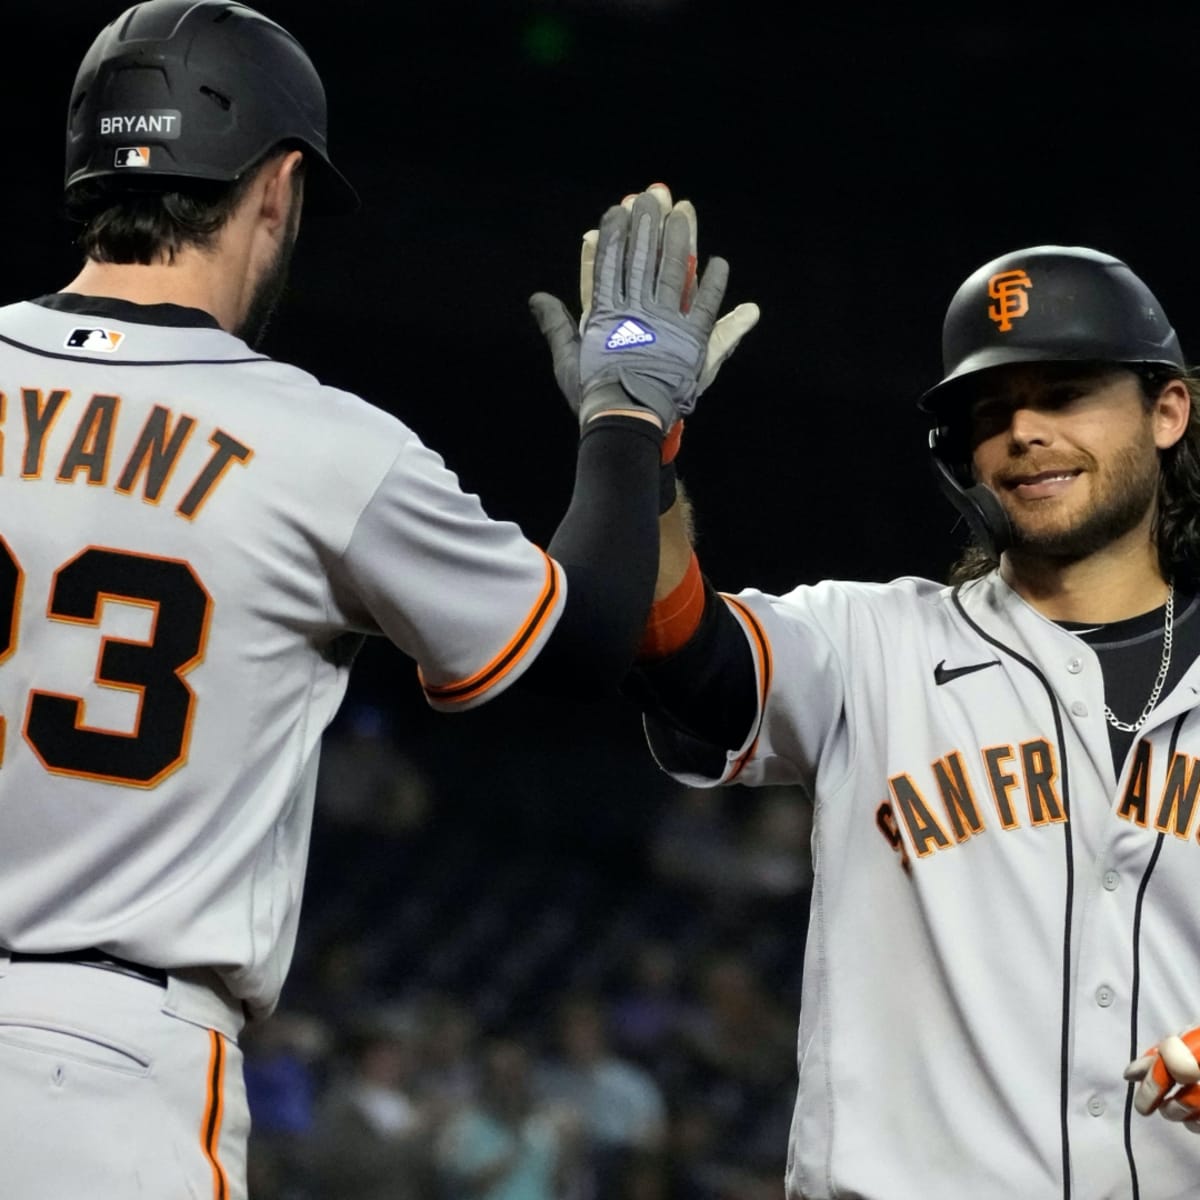 Giant happy birthday to the one and - San Francisco Giants